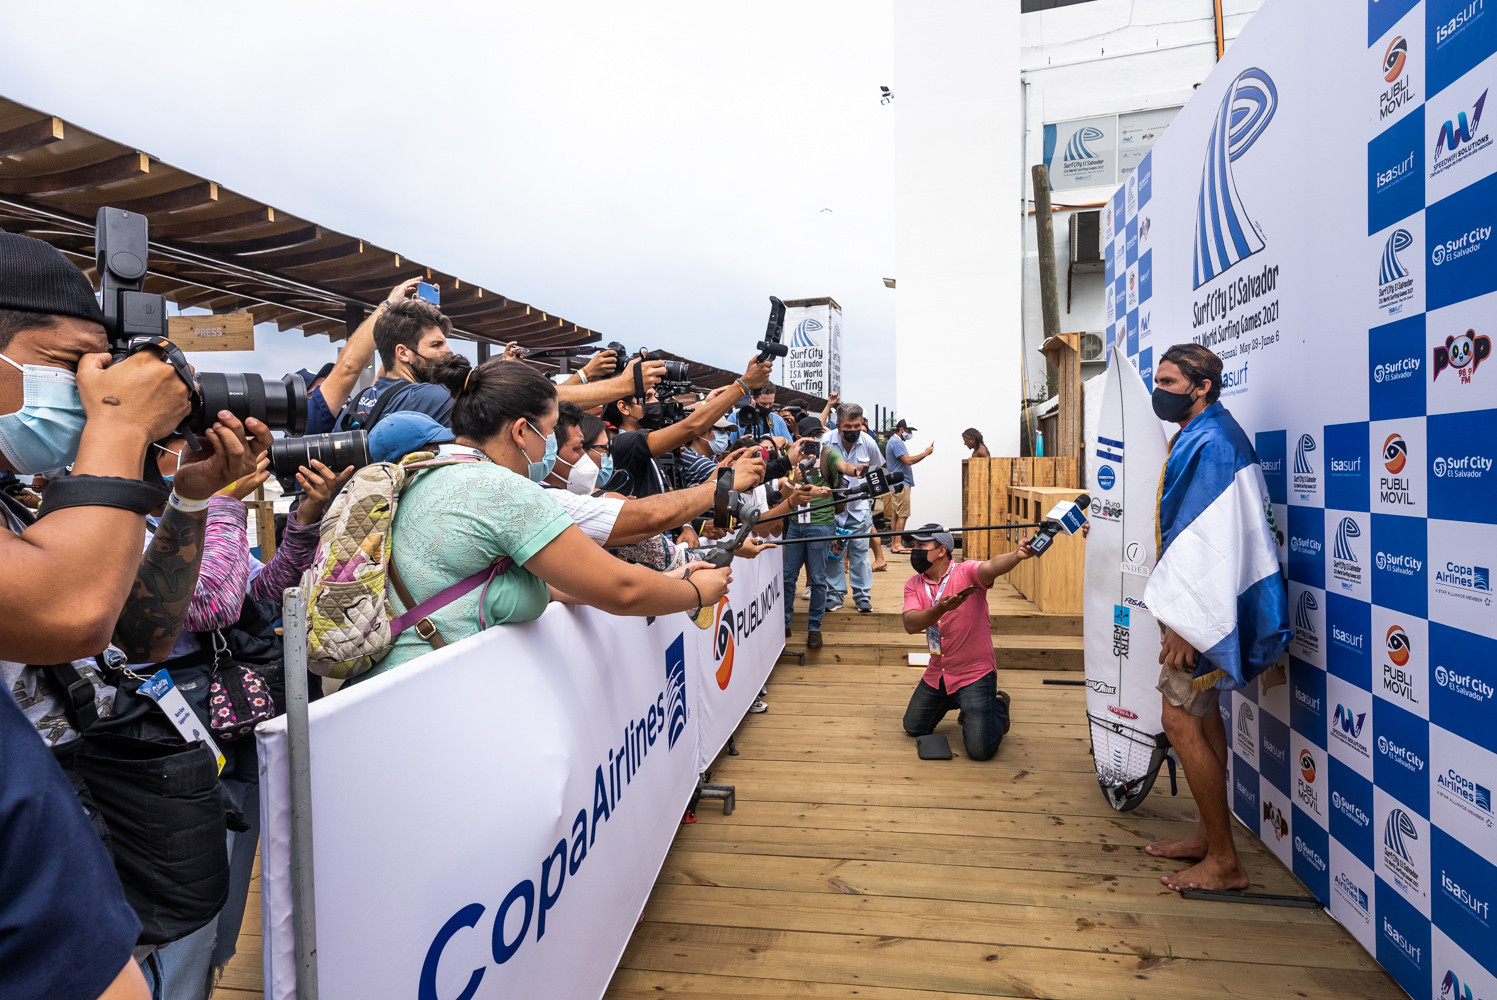 Bryan Perez of El Salvador speaks to the media after winning his repechage heat with 14.37 points ©ISA/Sean Evans